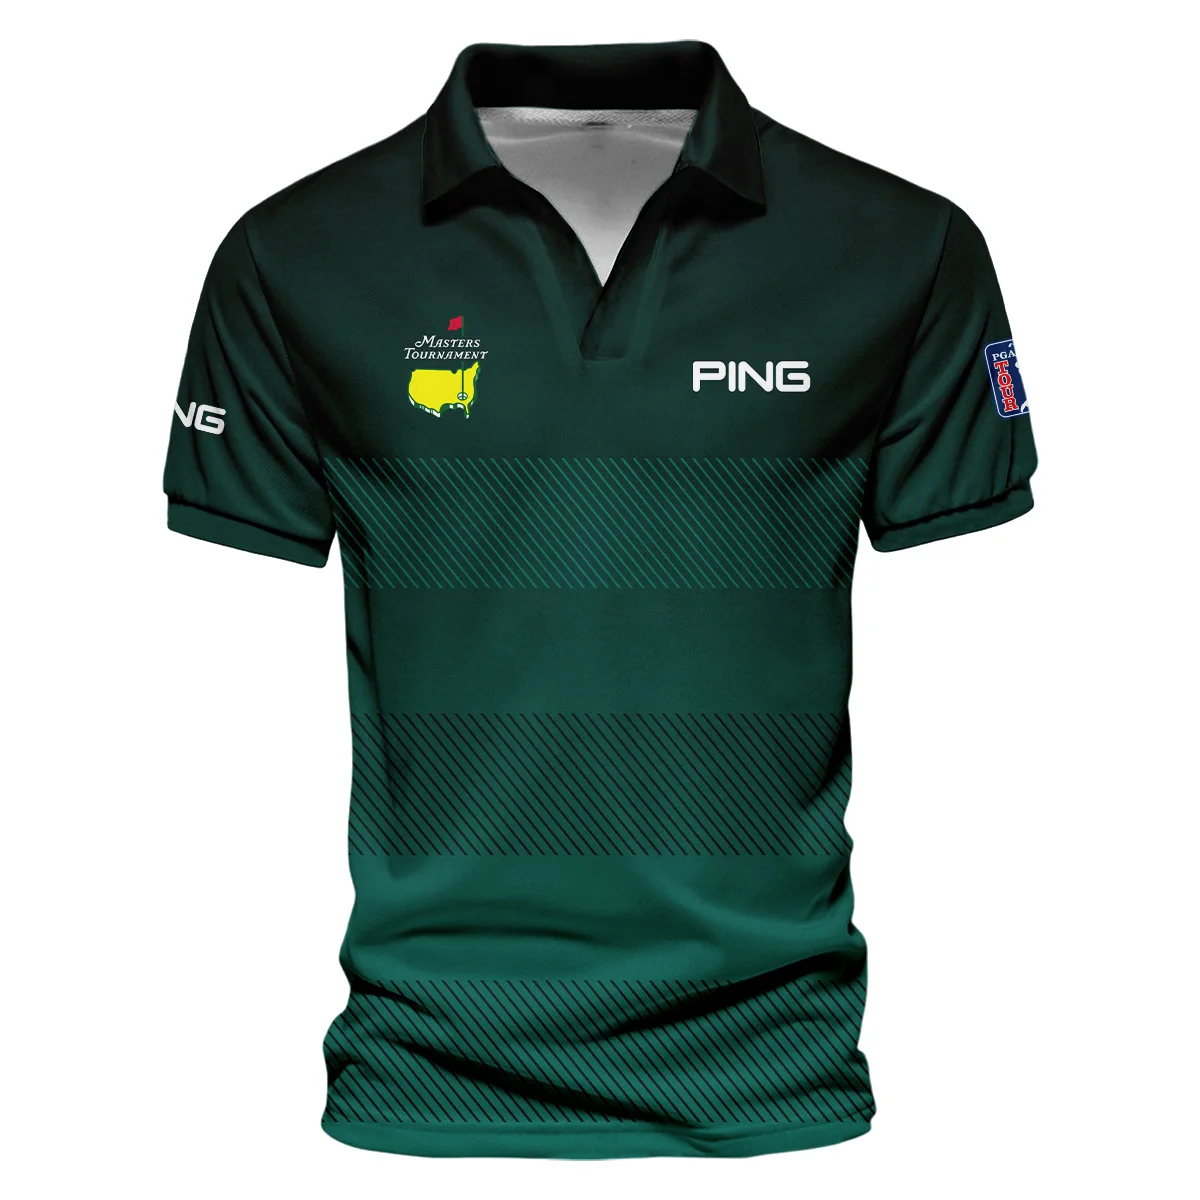 Ping Masters Tournament Dark Green Gradient Stripes Pattern Golf Sport Vneck Polo Shirt Style Classic Polo Shirt For Men